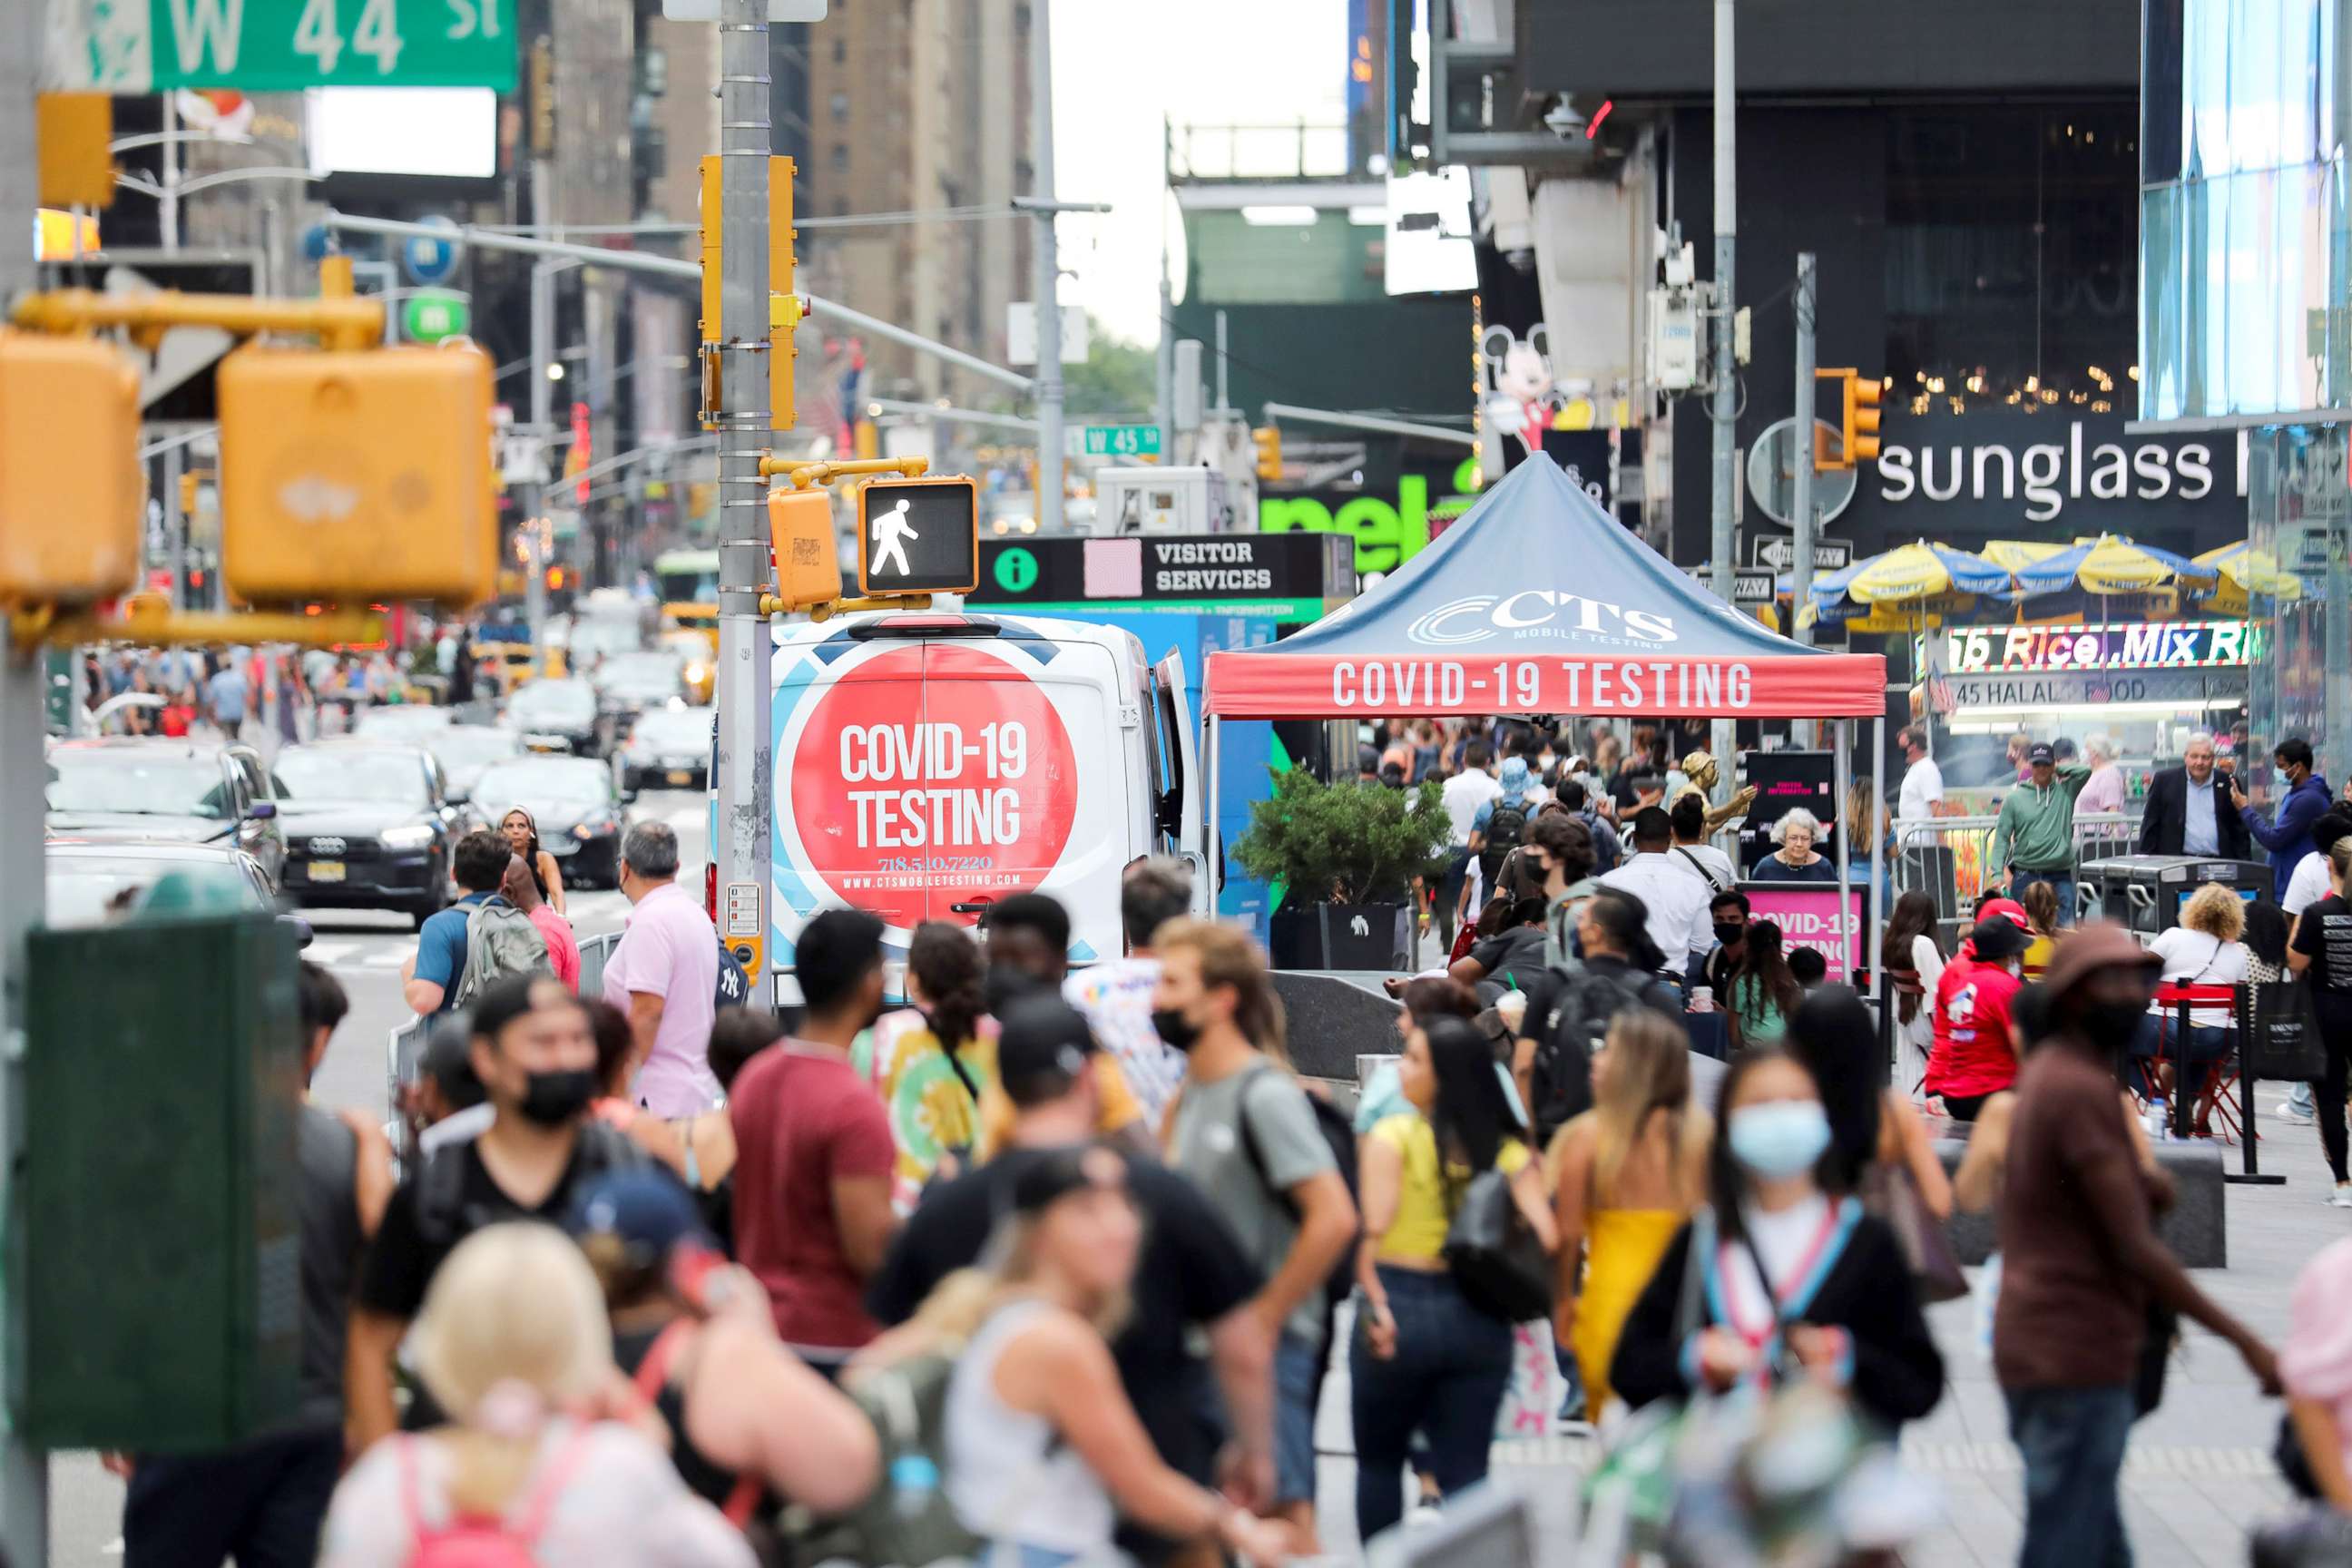 PHOTO:A mobile COVID-19 testing site operates in a busy street on Aug. 31, 2021 in New York City.